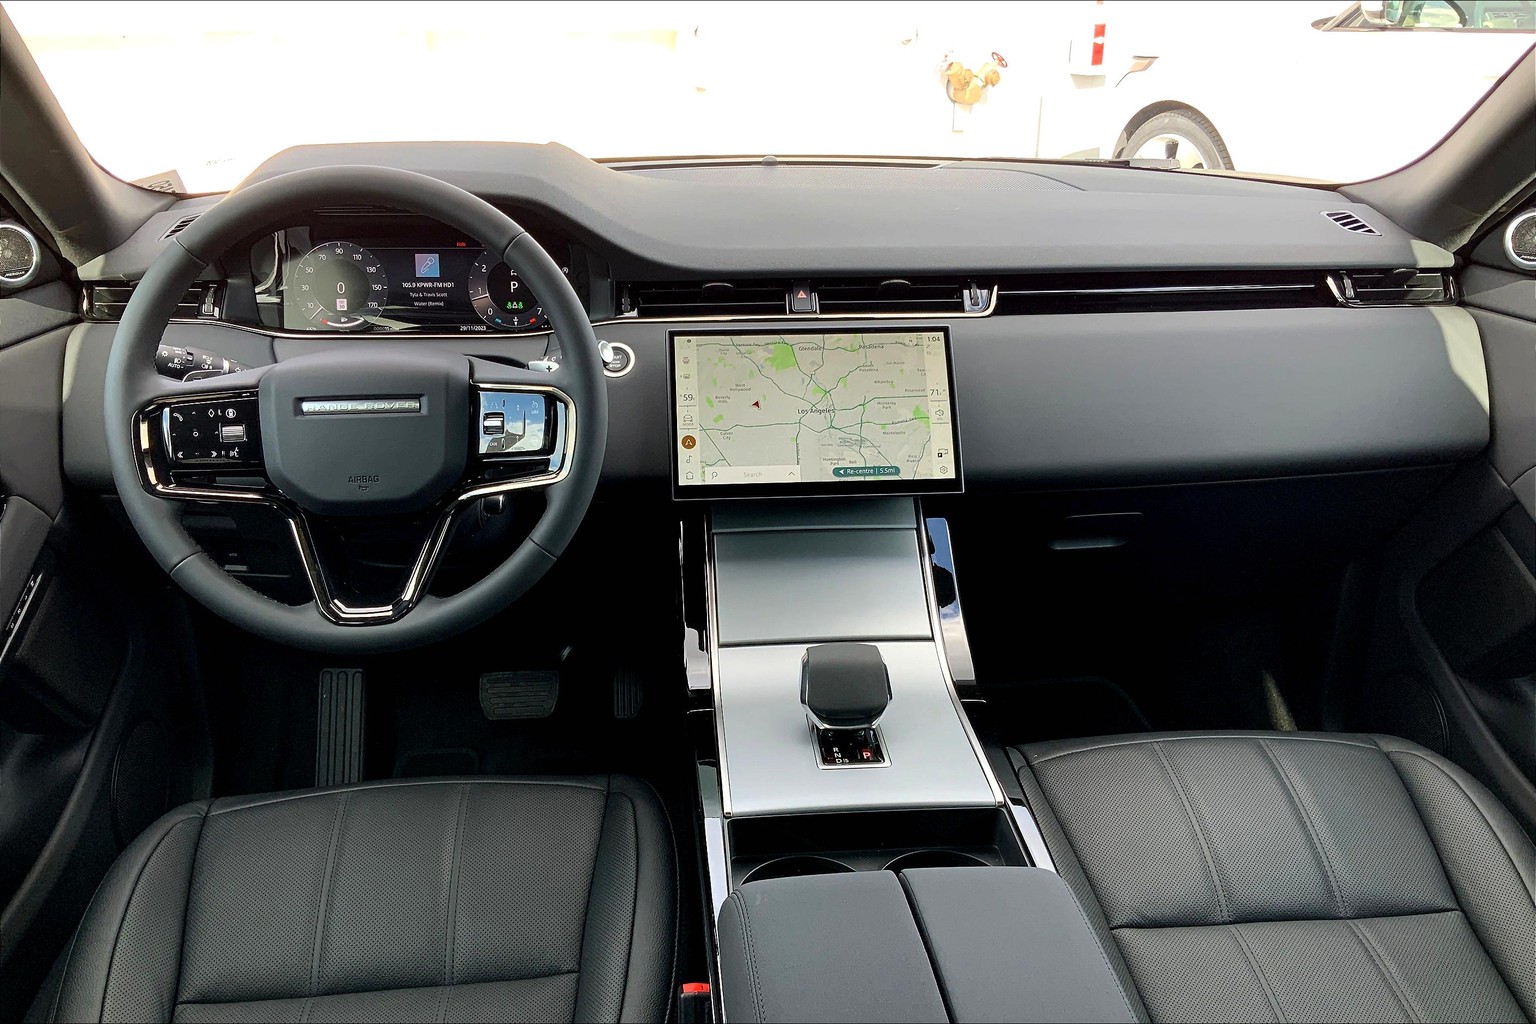 2024 Range Rover Evoque Has Fancy LEDs And New Interior Tech